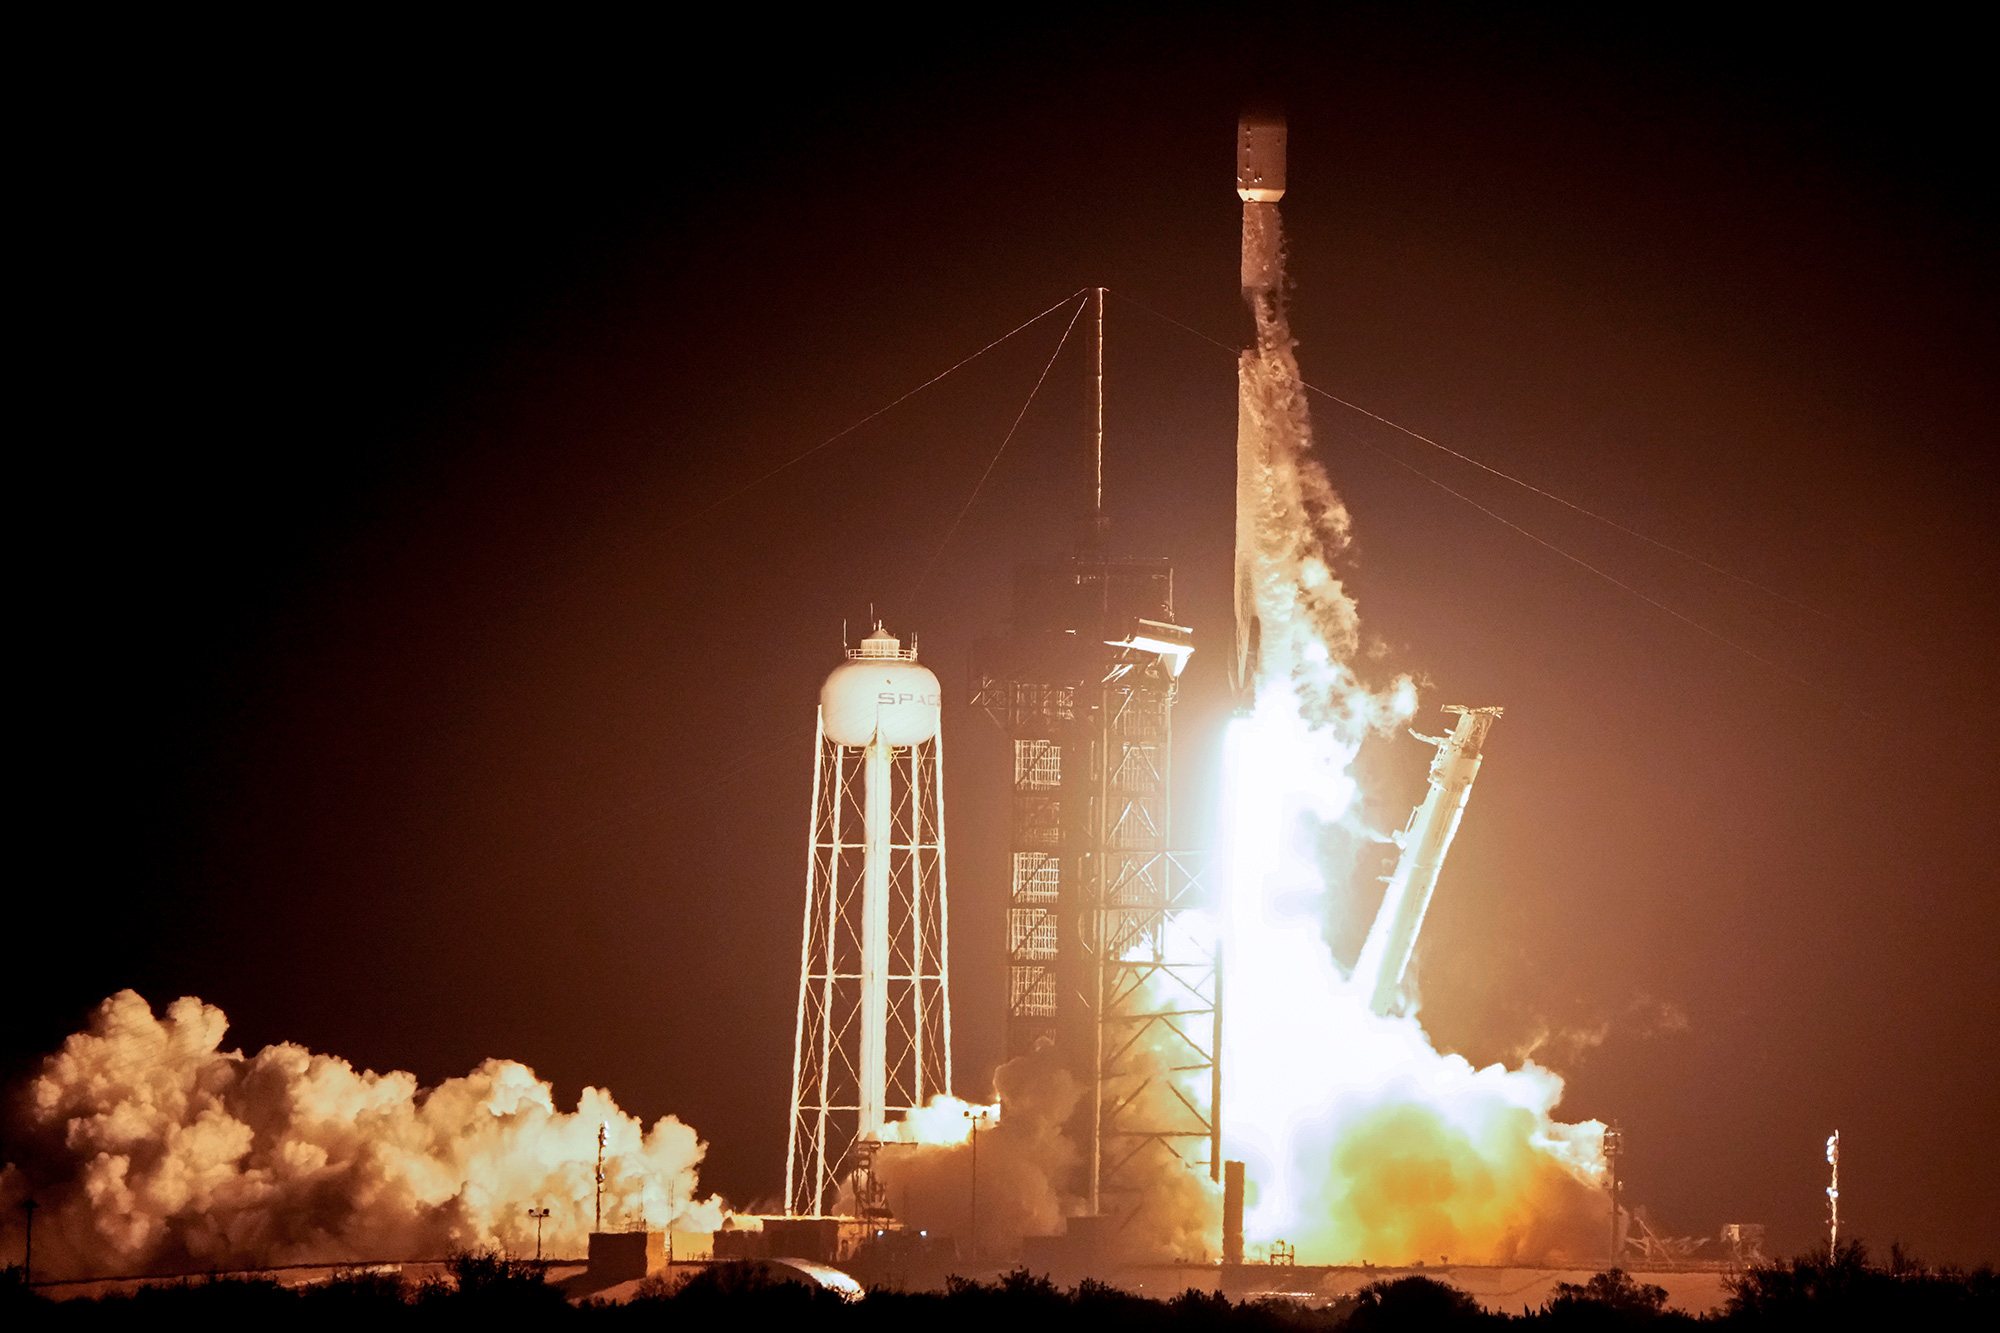 Intuitive Machines' Odysseus lunar lander lifts off to space in Cape Canaveral, Florida, on February 15.